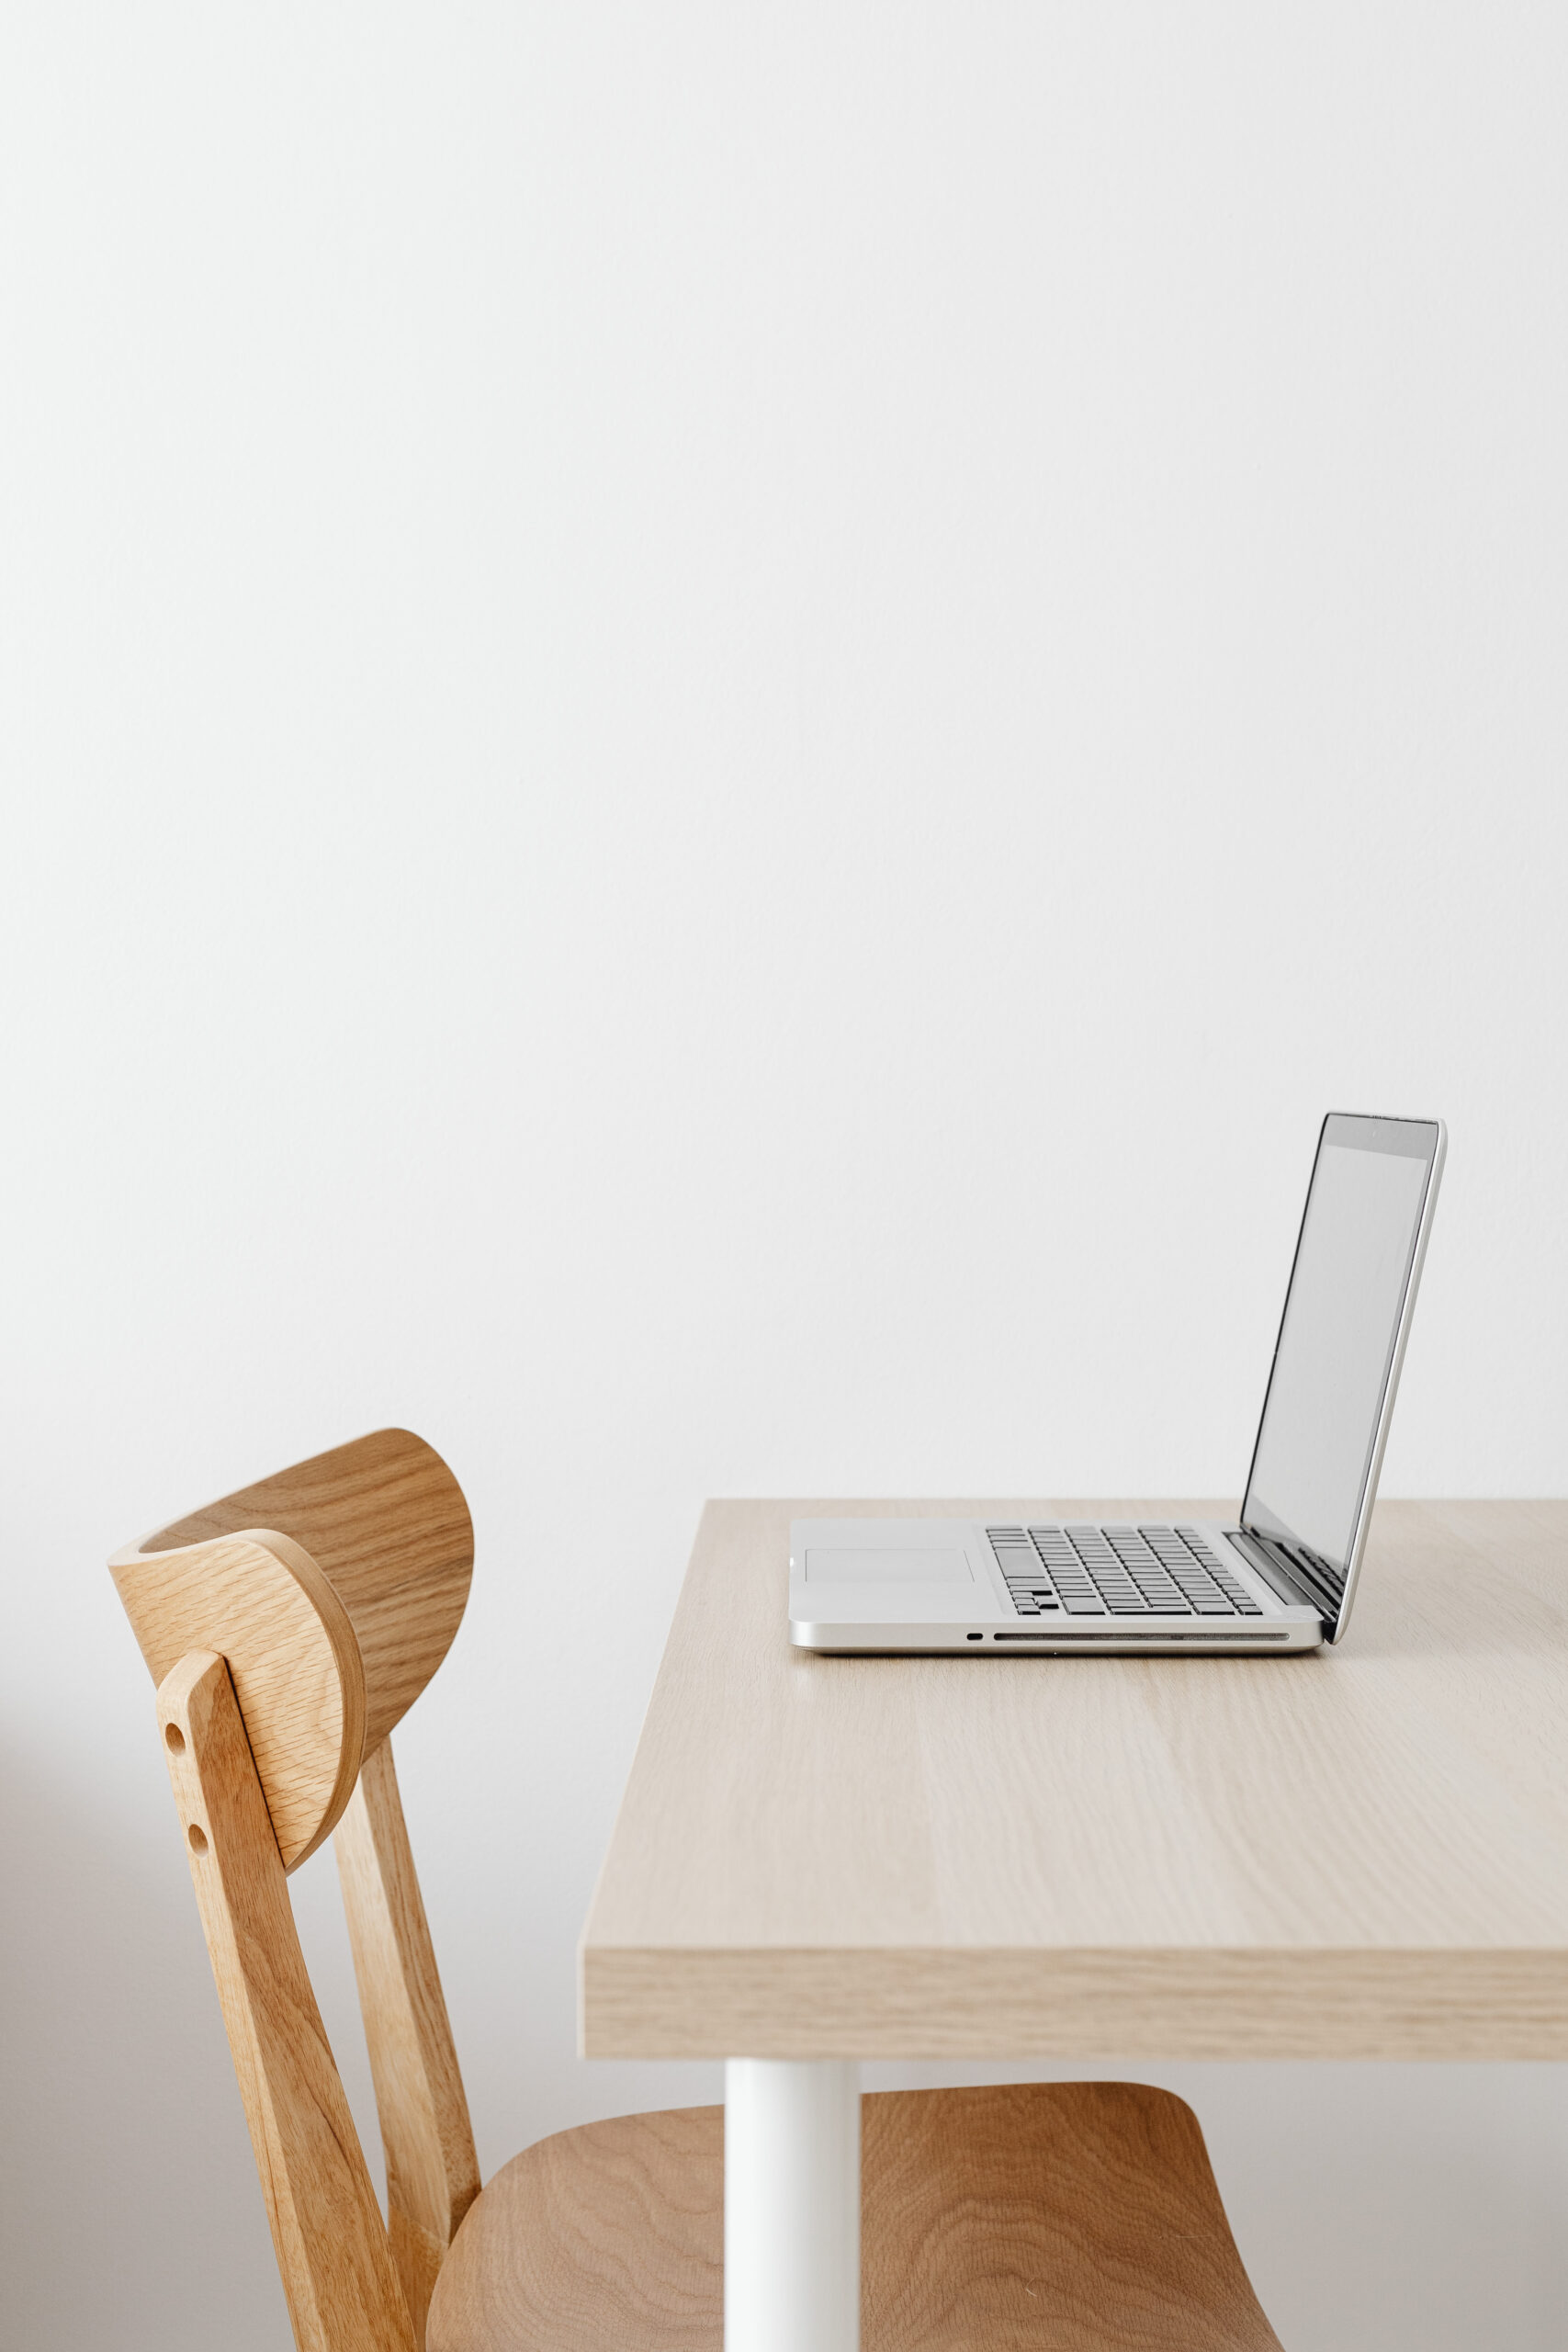 Laptop on a light wooden desk with a wood chair